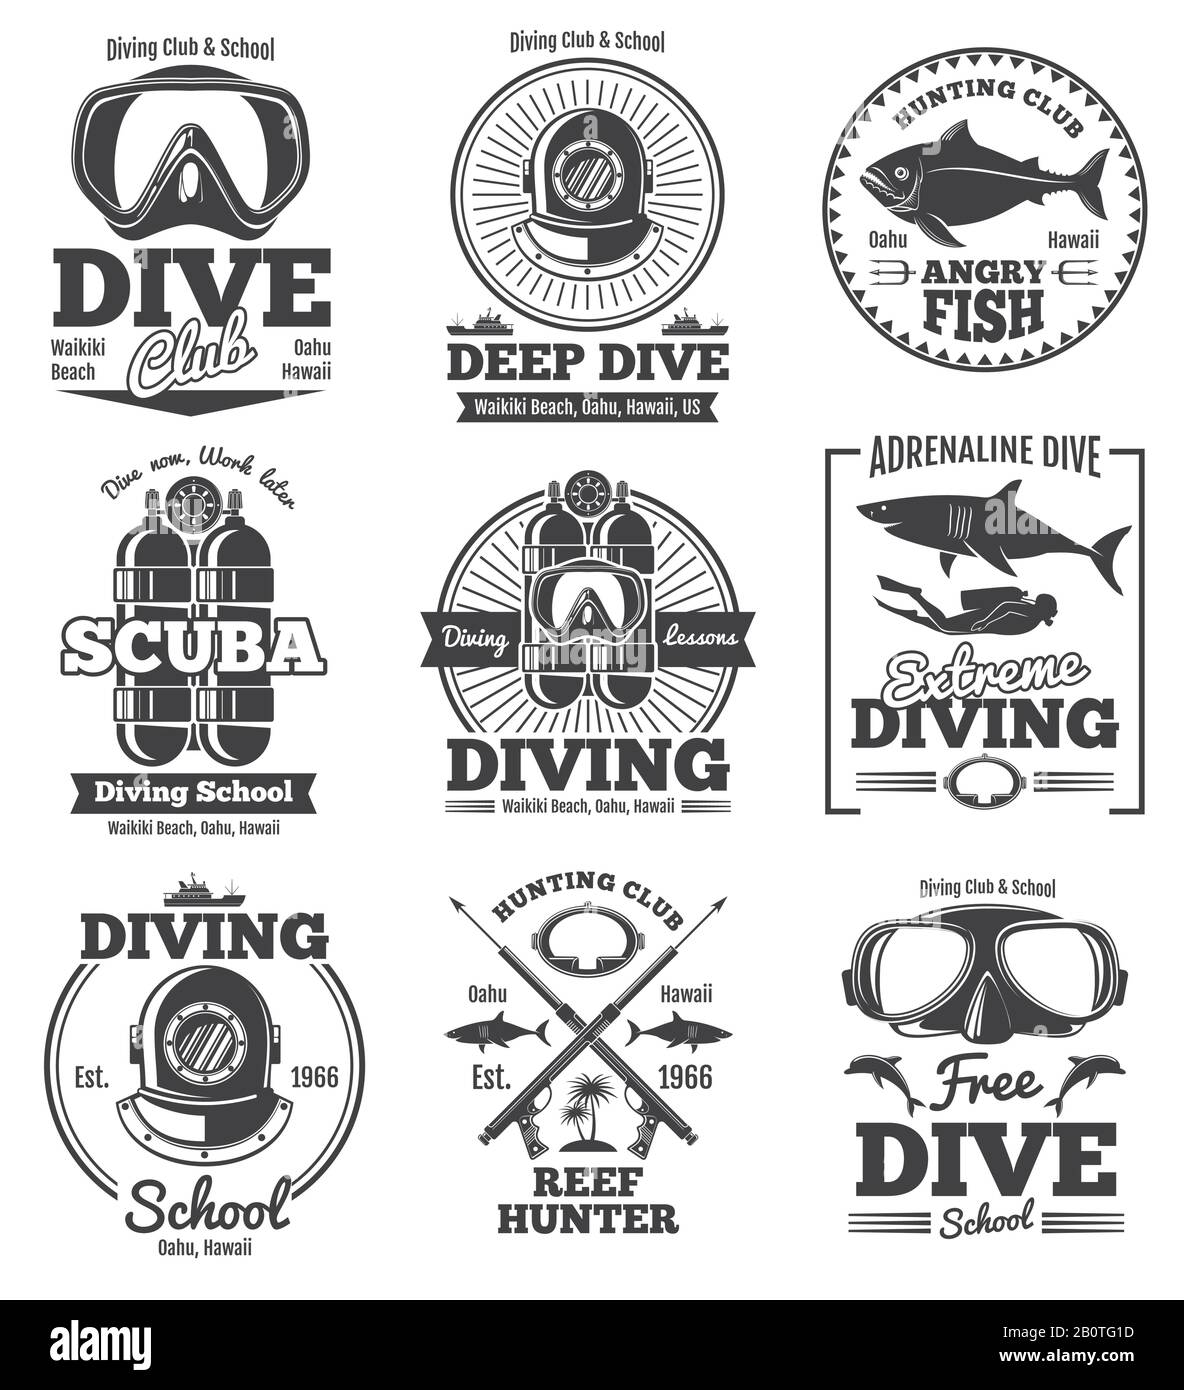 Underwater scuba diving club vector vintage emblems and labels. Sport freediving label, illustration of diving scuba club Stock Vector